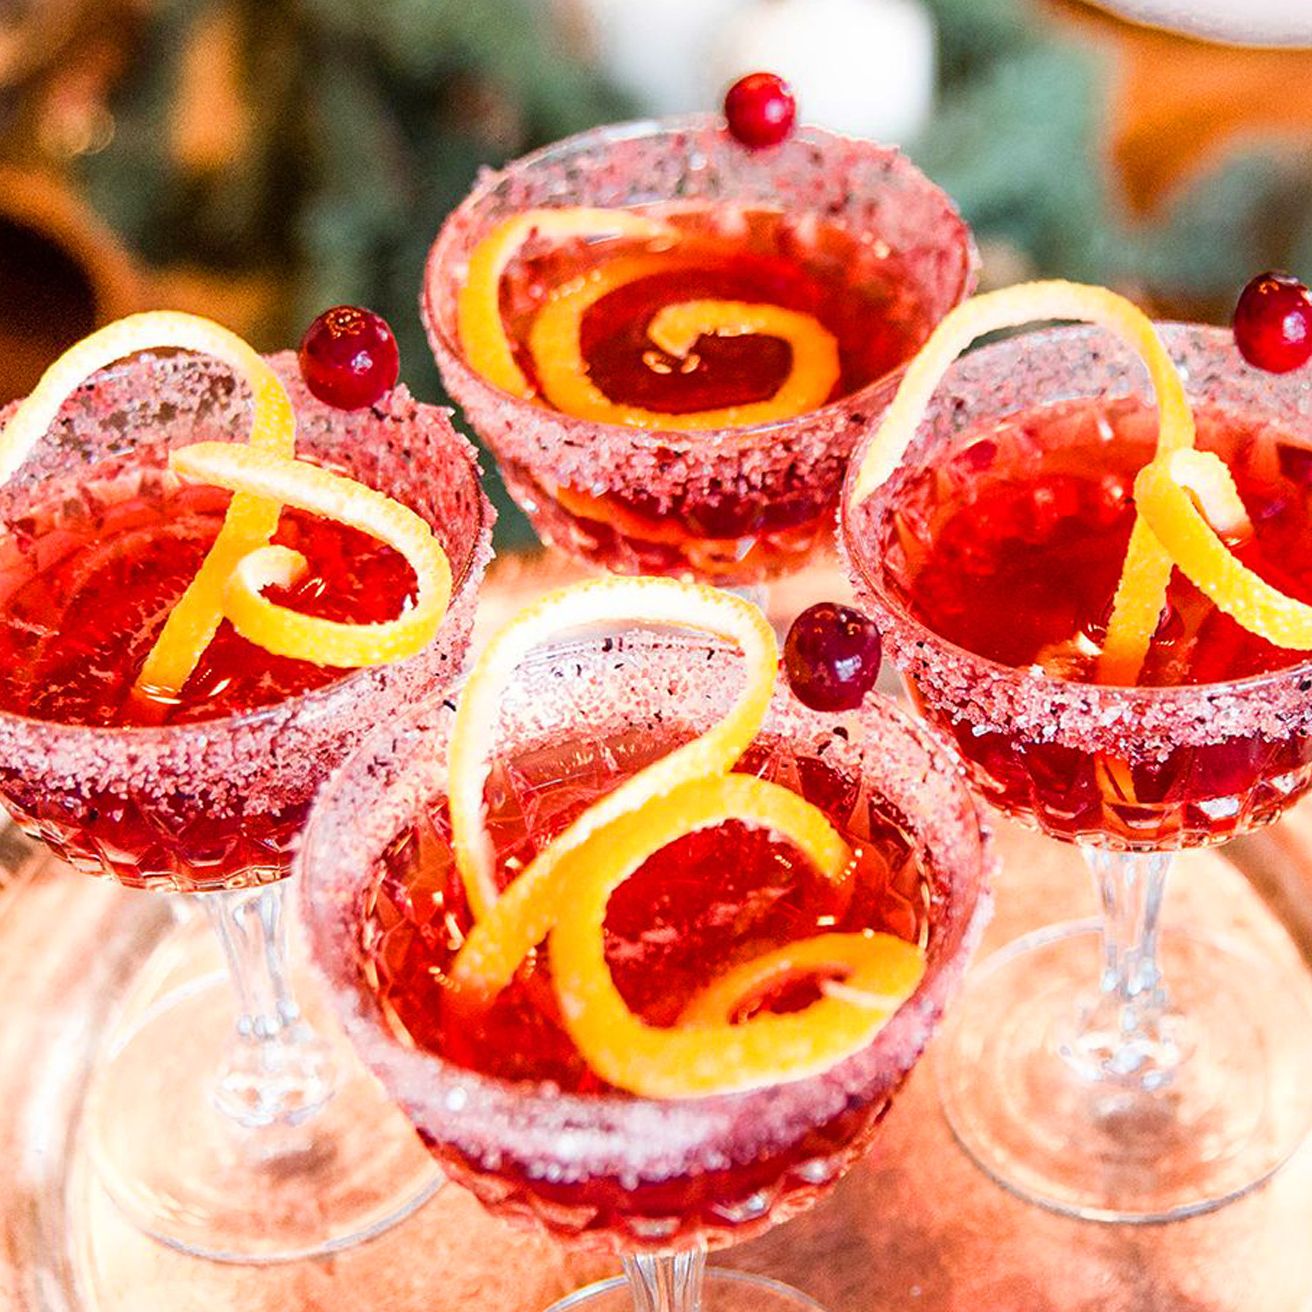 91 Christmas Cocktails & Holiday Alcoholic Drink Recipes for 2019